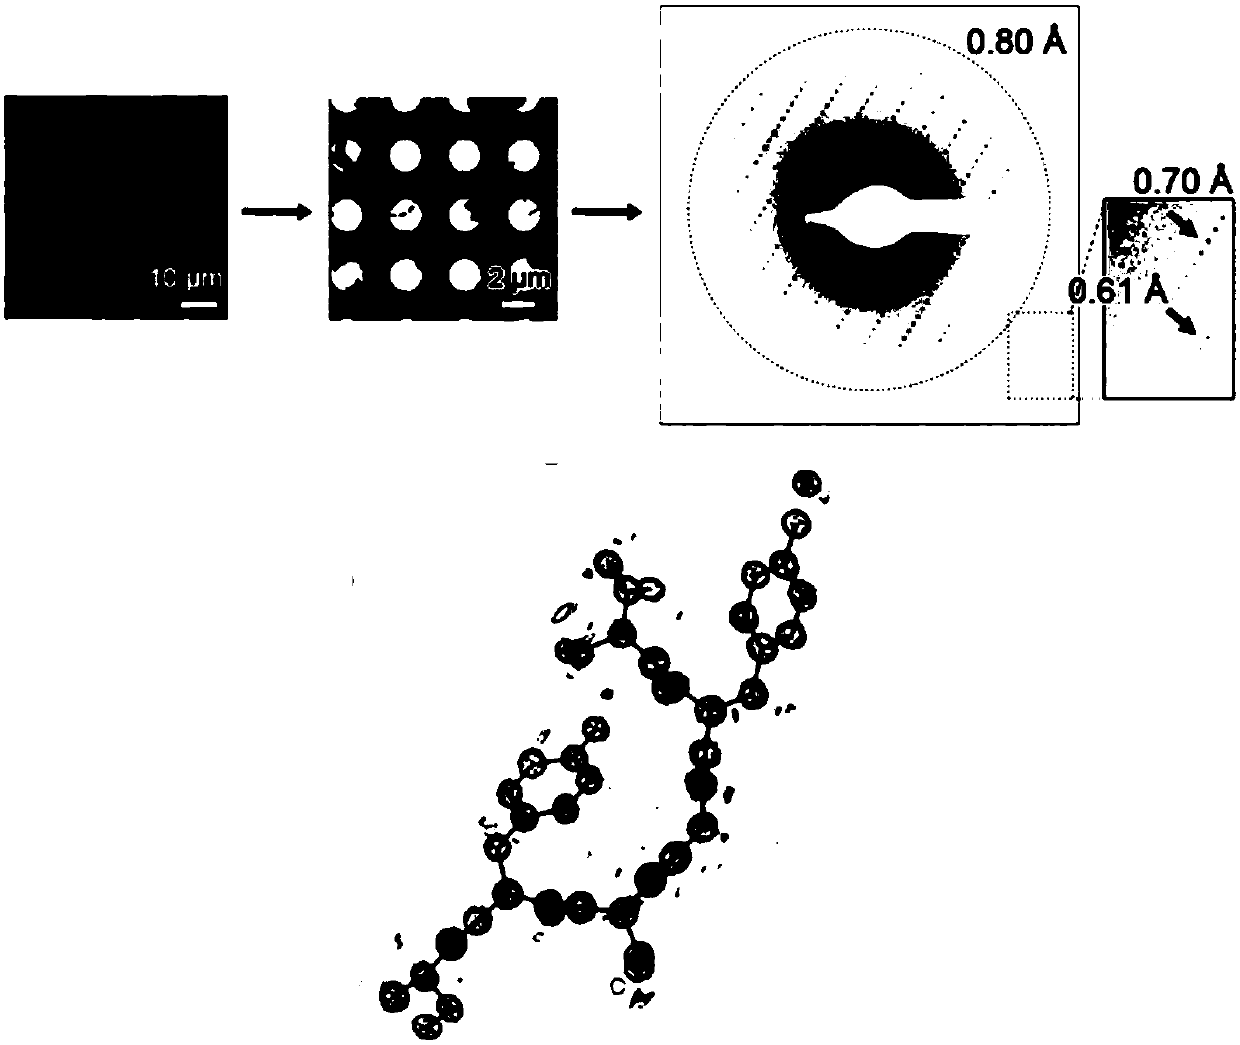 Preparation of protein micro crystal frozen sample and method of structural analysis